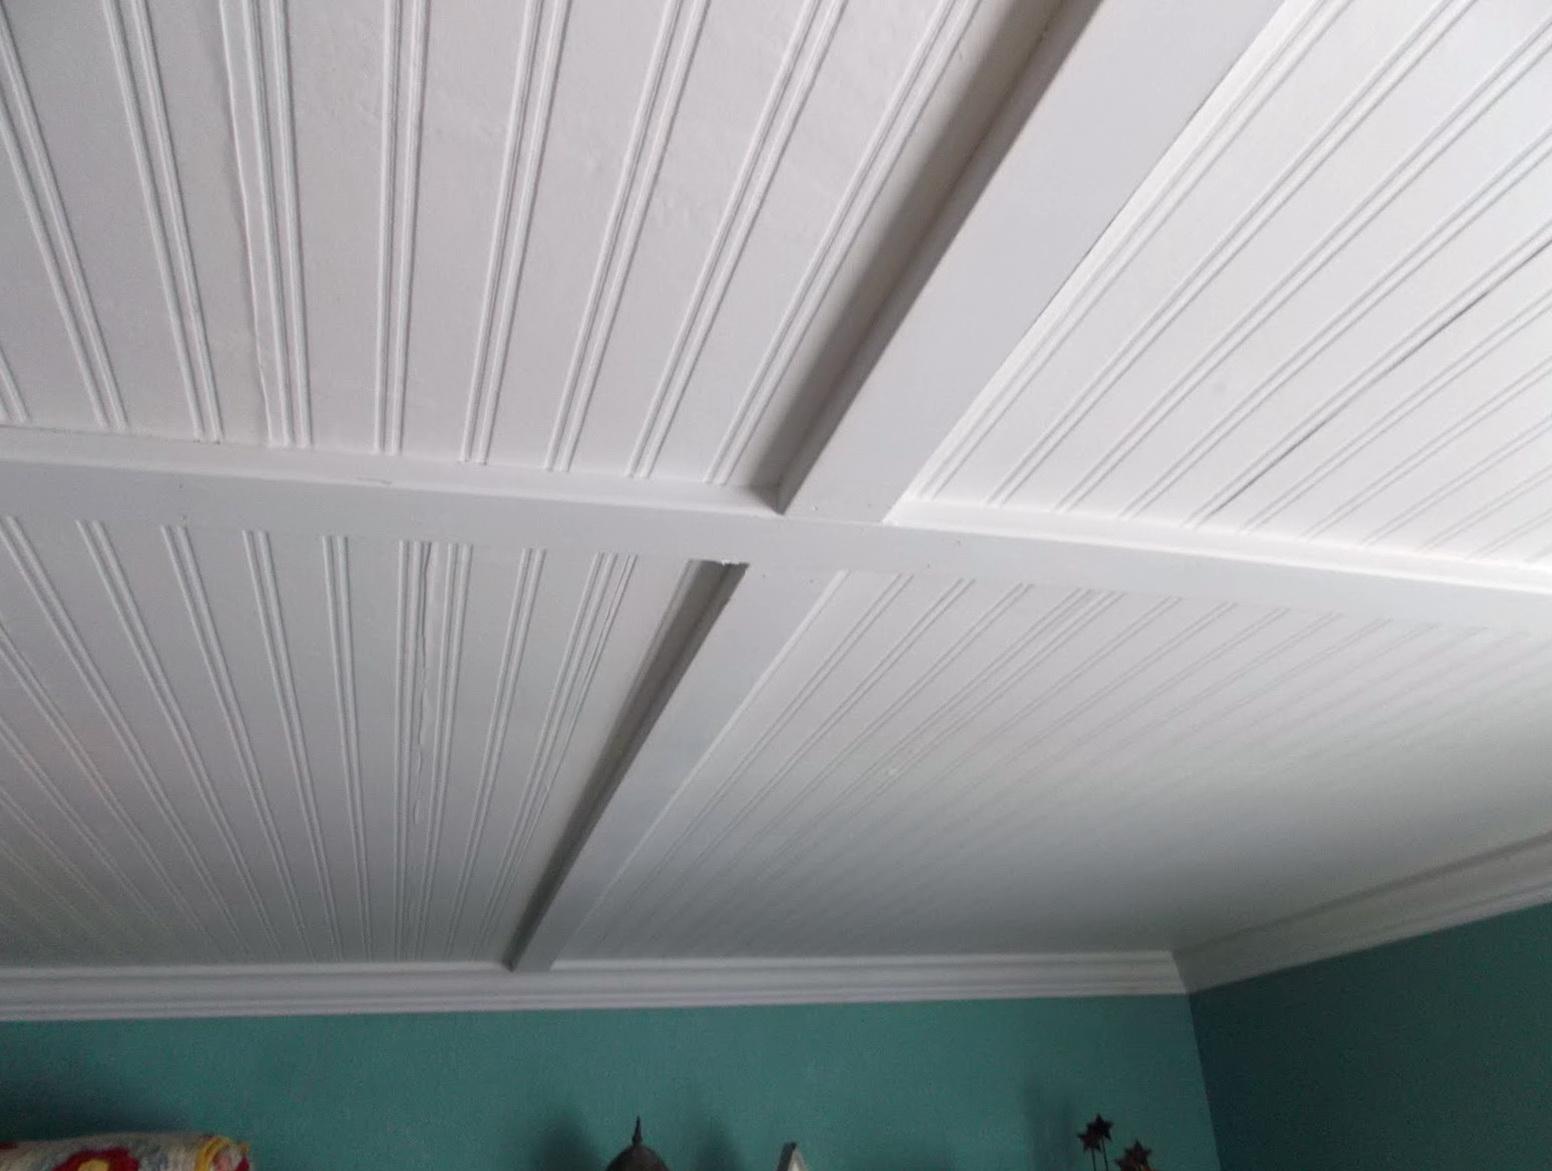 Covering Popcorn Ceiling Tiles Covering Popcorn Ceiling Tiles cover popcorn ceiling jeffnjosh 1552 X 1171